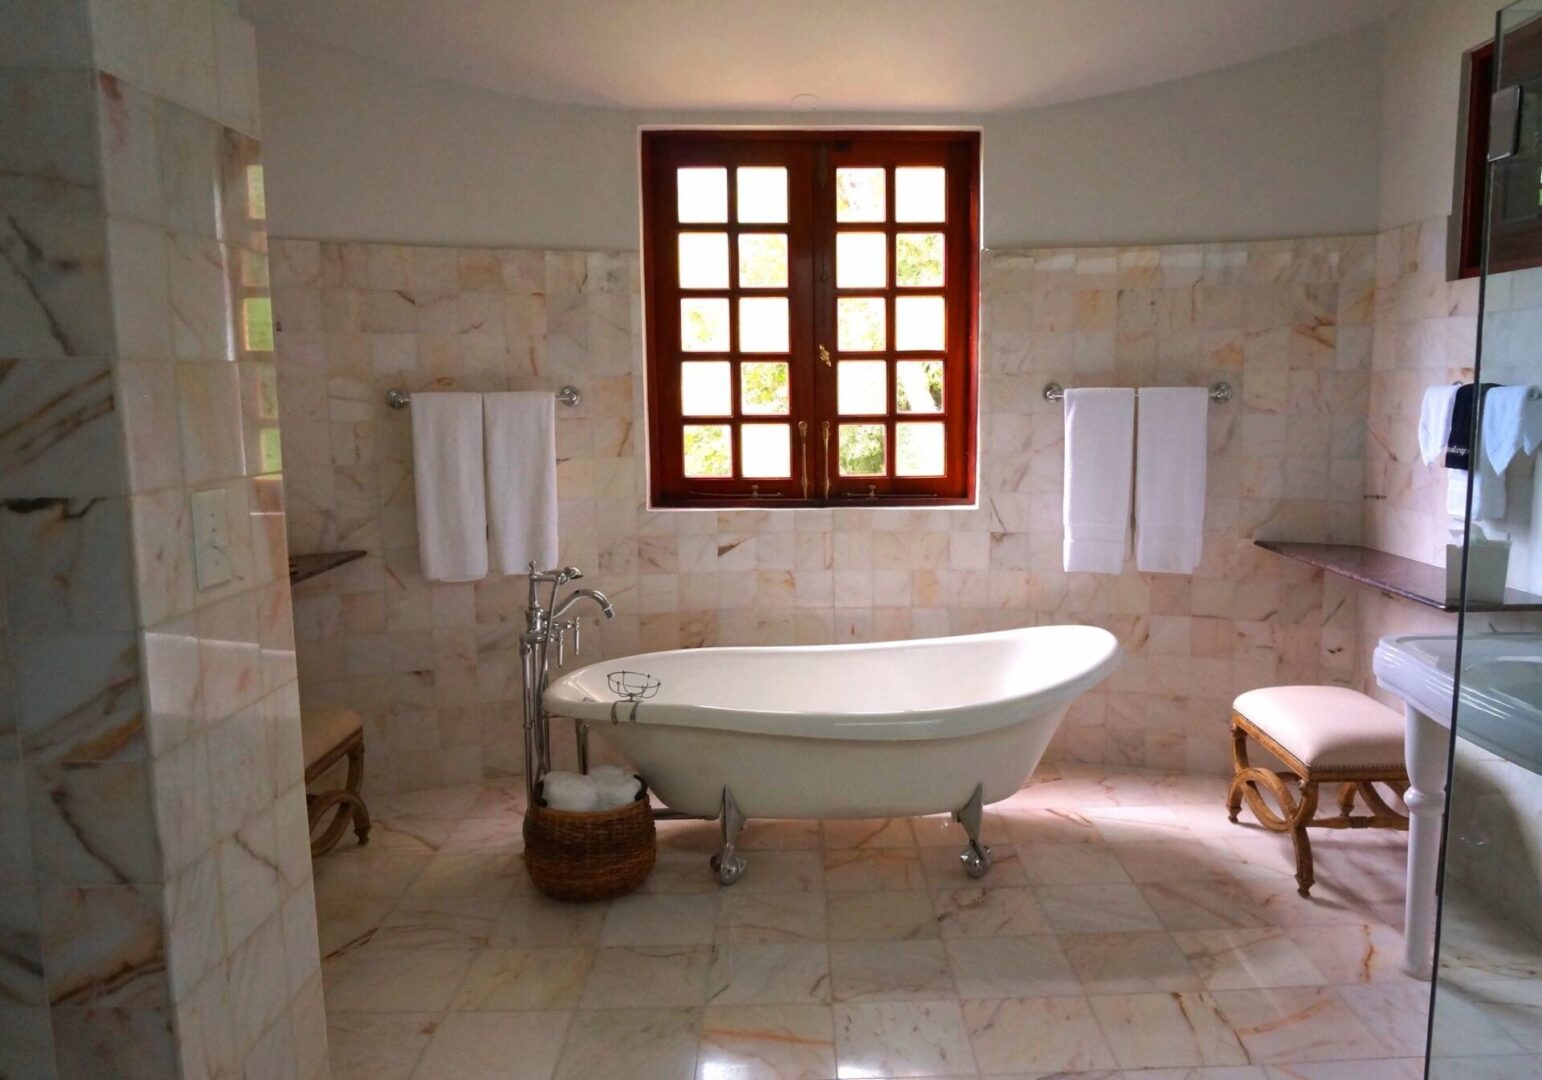 A bathroom with a tub and two windows.